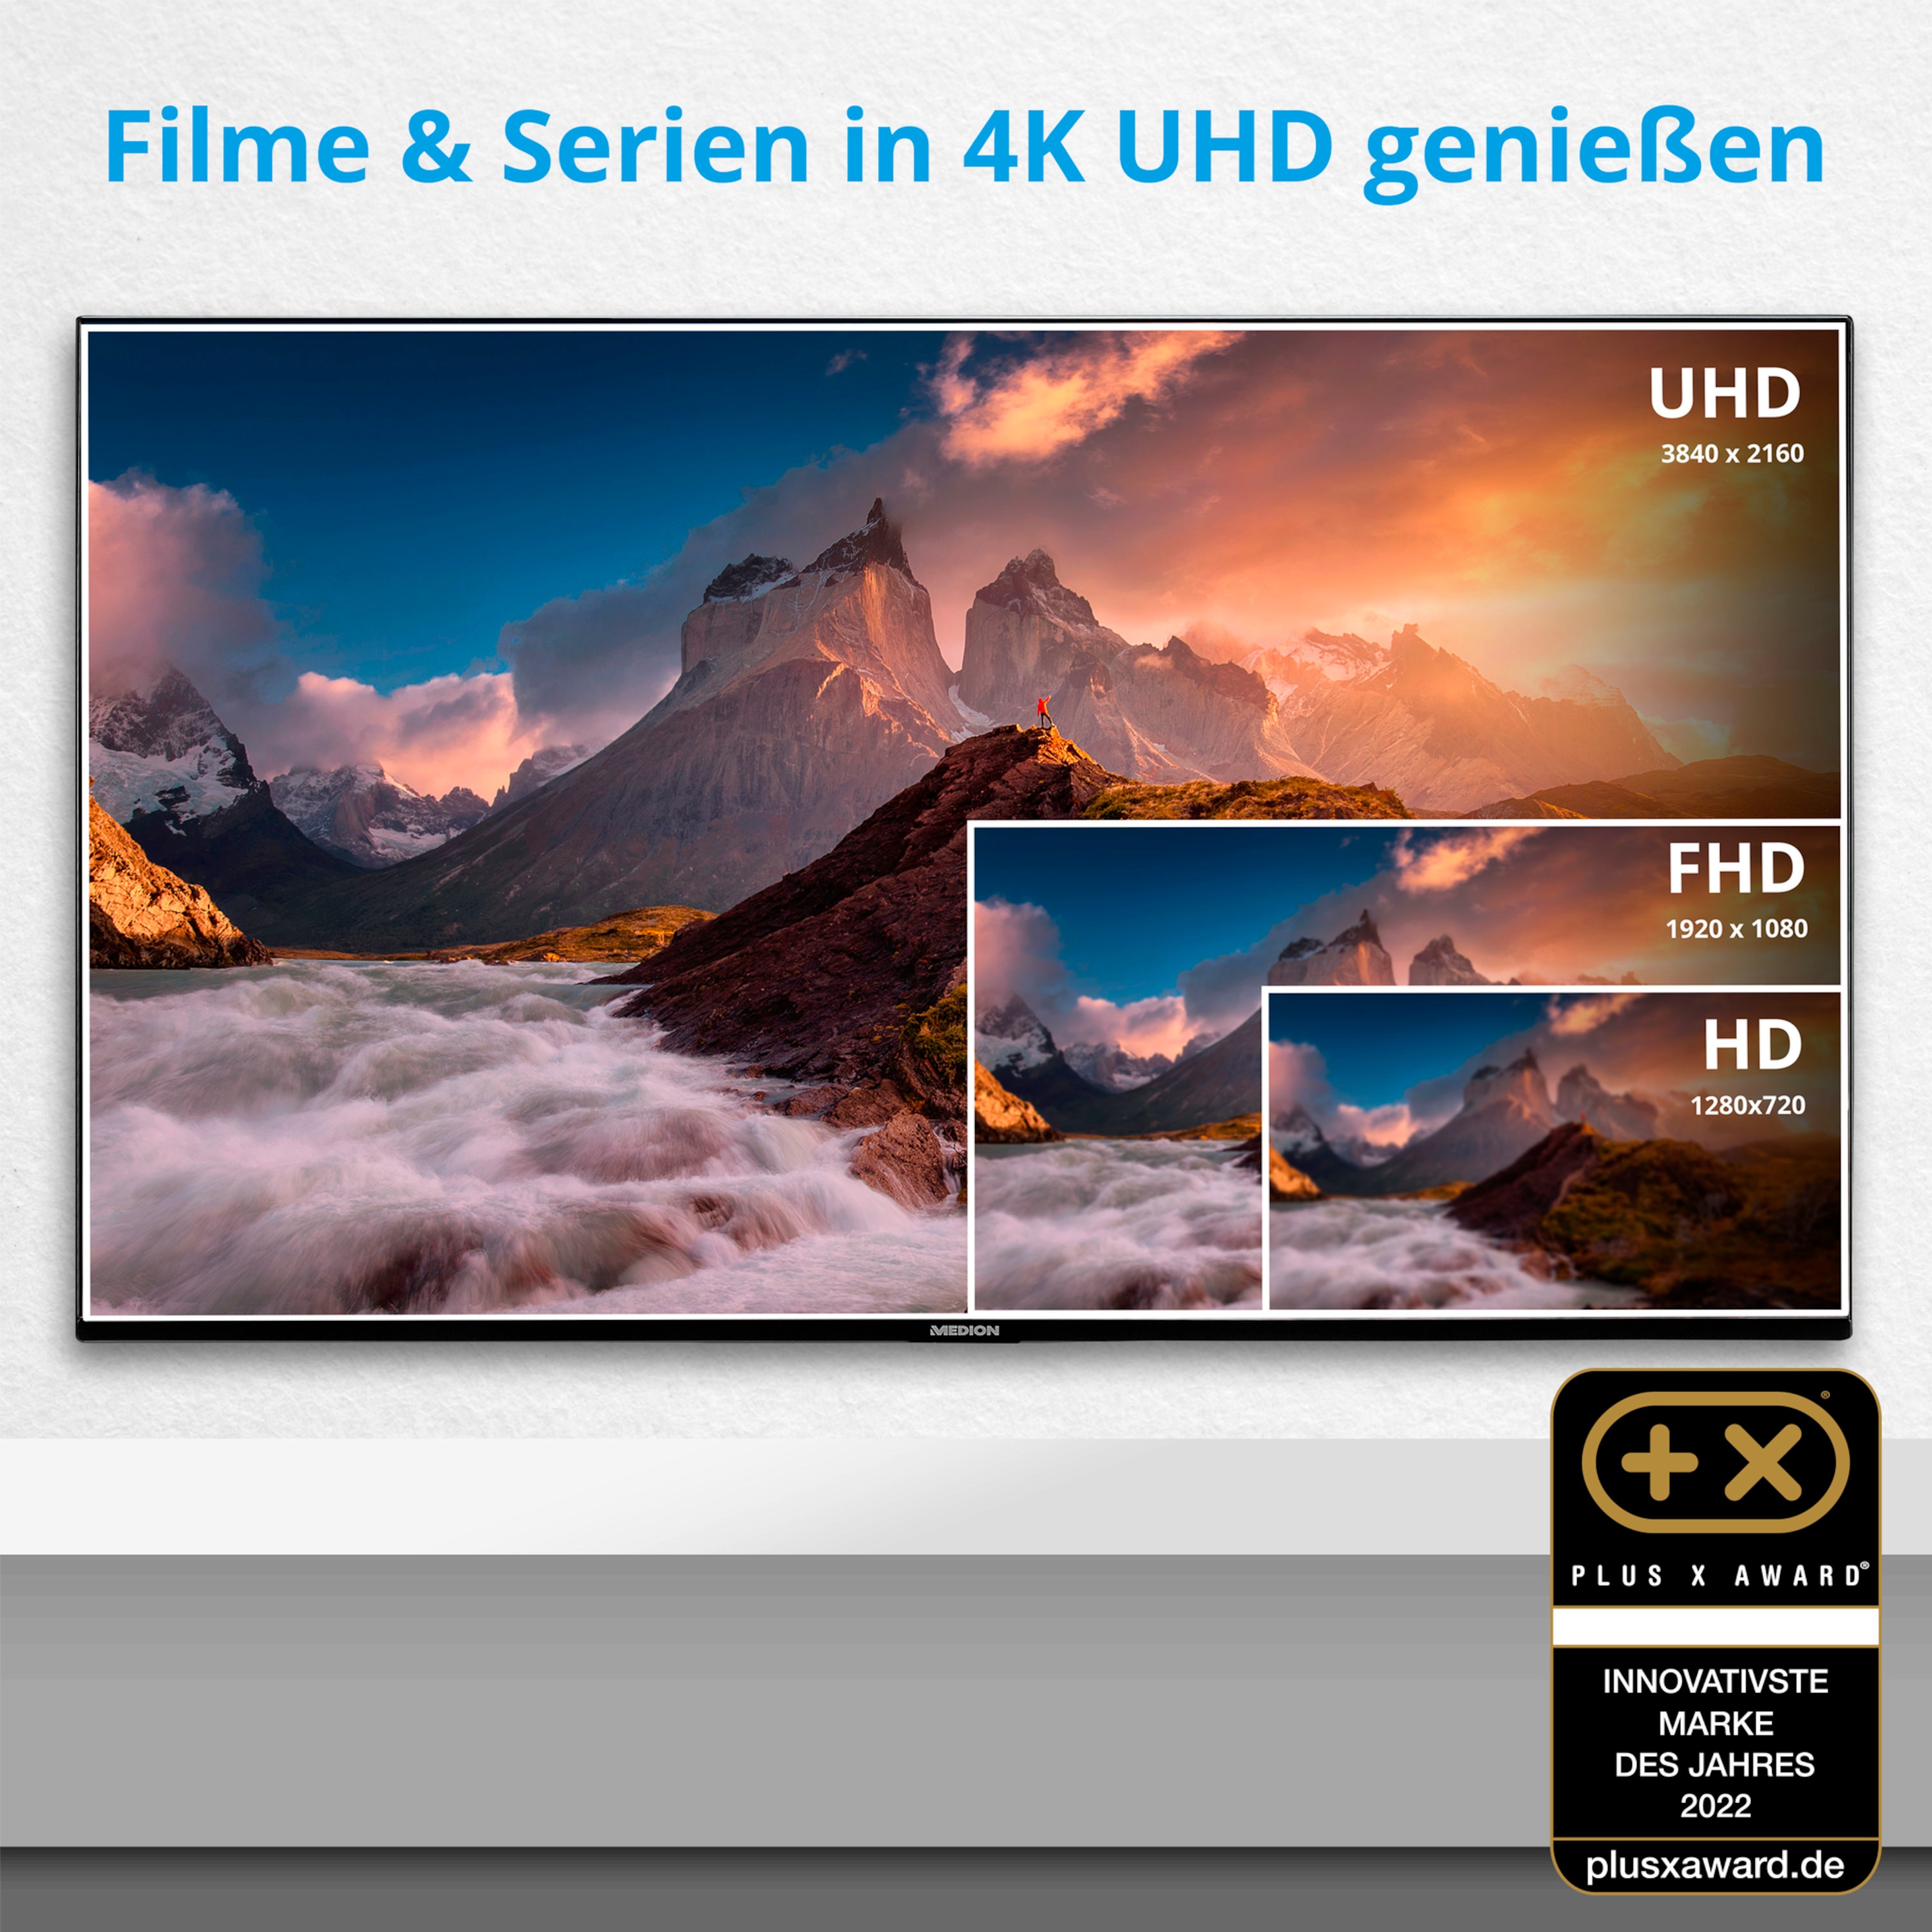 MEDION® LIFE® X16518 (MD 30062) QLED Android TV, 163,9 cm (65'') Ultra HD Smart-TV, HDR, Dolby Vision®, Micro Dimming, MEMC, PVR ready, Netflix, Amazon Prime Video, Bluetooth®, DTS Virtual X, DTS X und Dolby Atmos, HD Triple Tuner, CI+